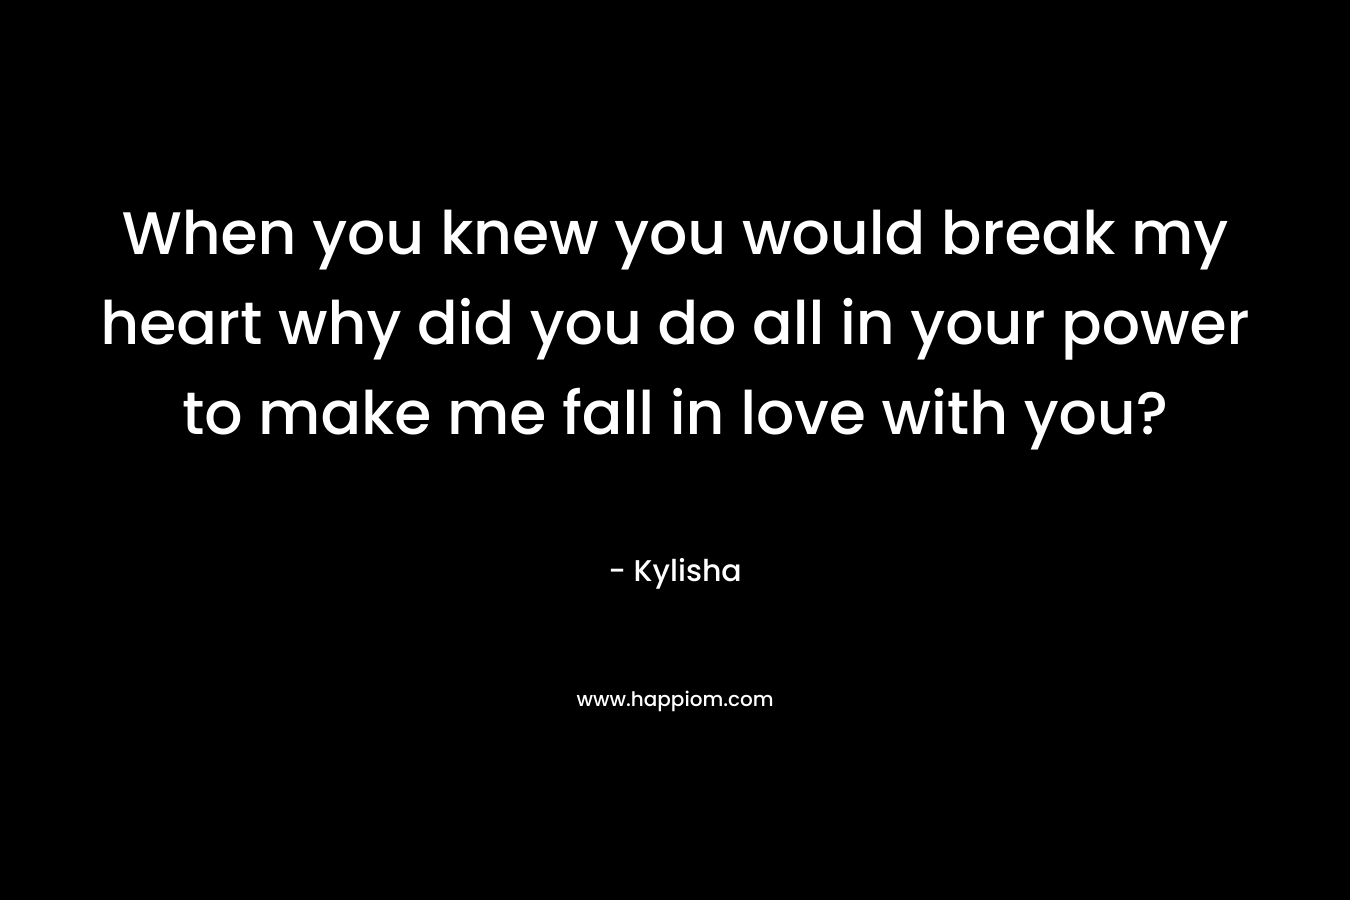 When you knew you would break my heart why did you do all in your power to make me fall in love with you? – Kylisha